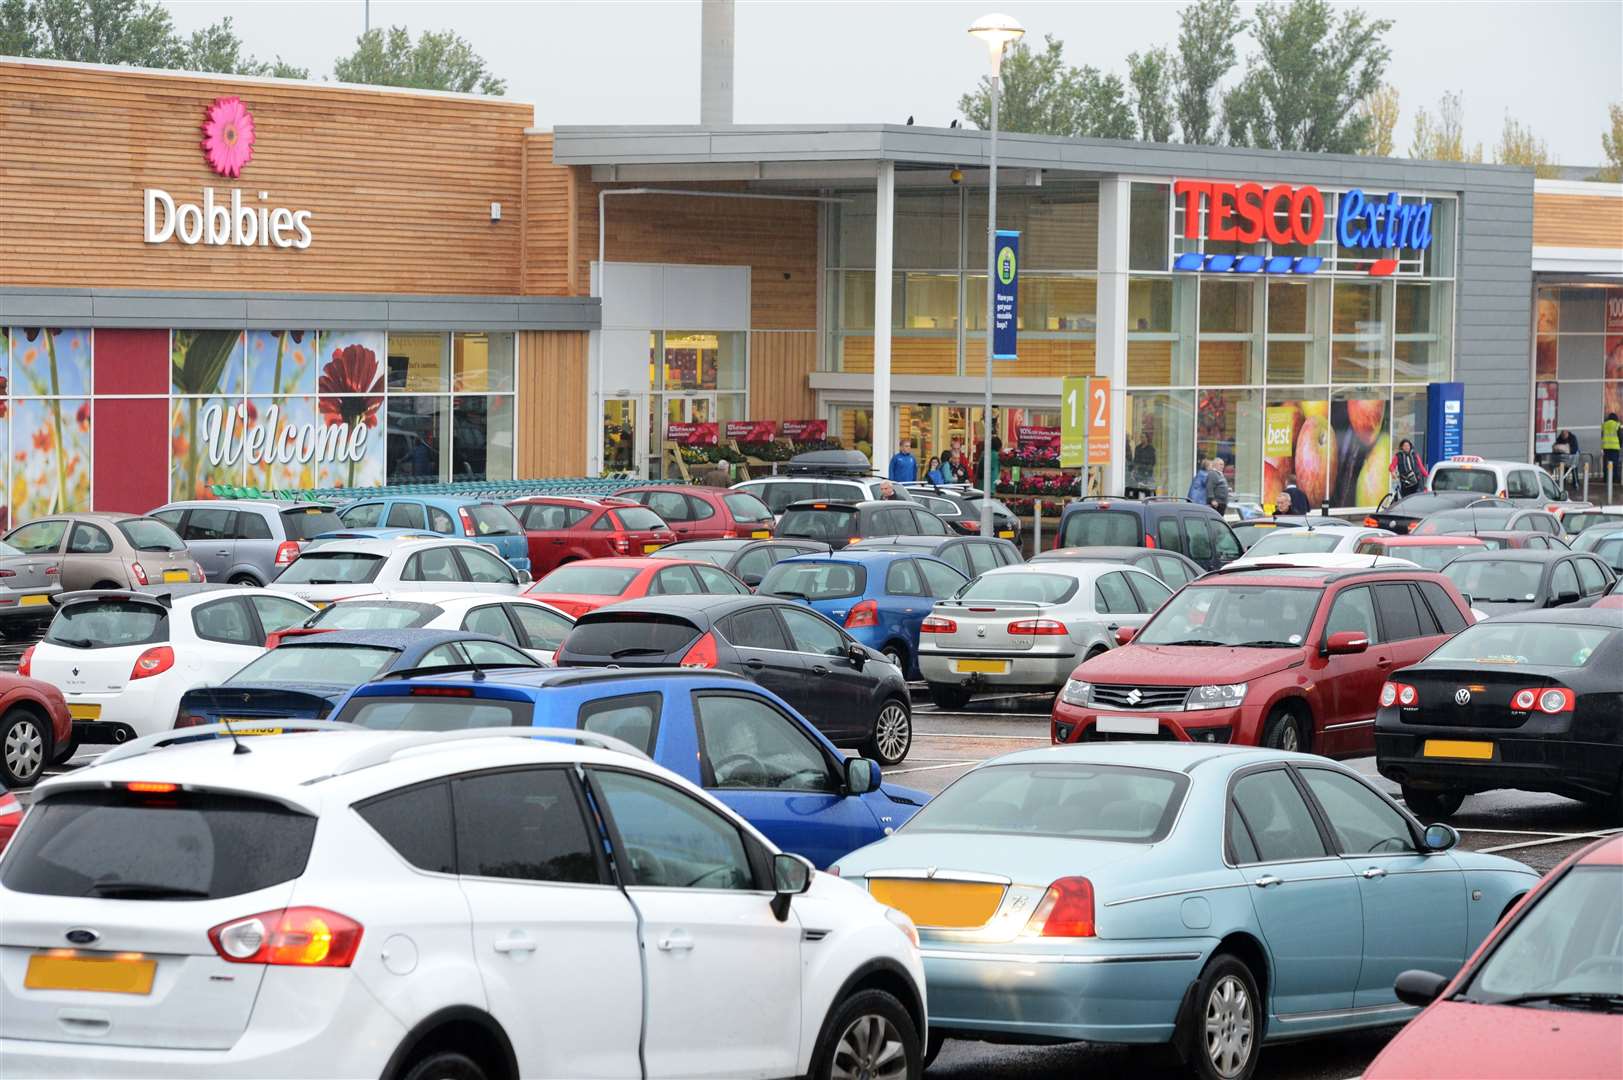 Tesco Extra at Inshes Retail Park includes a Post Office.